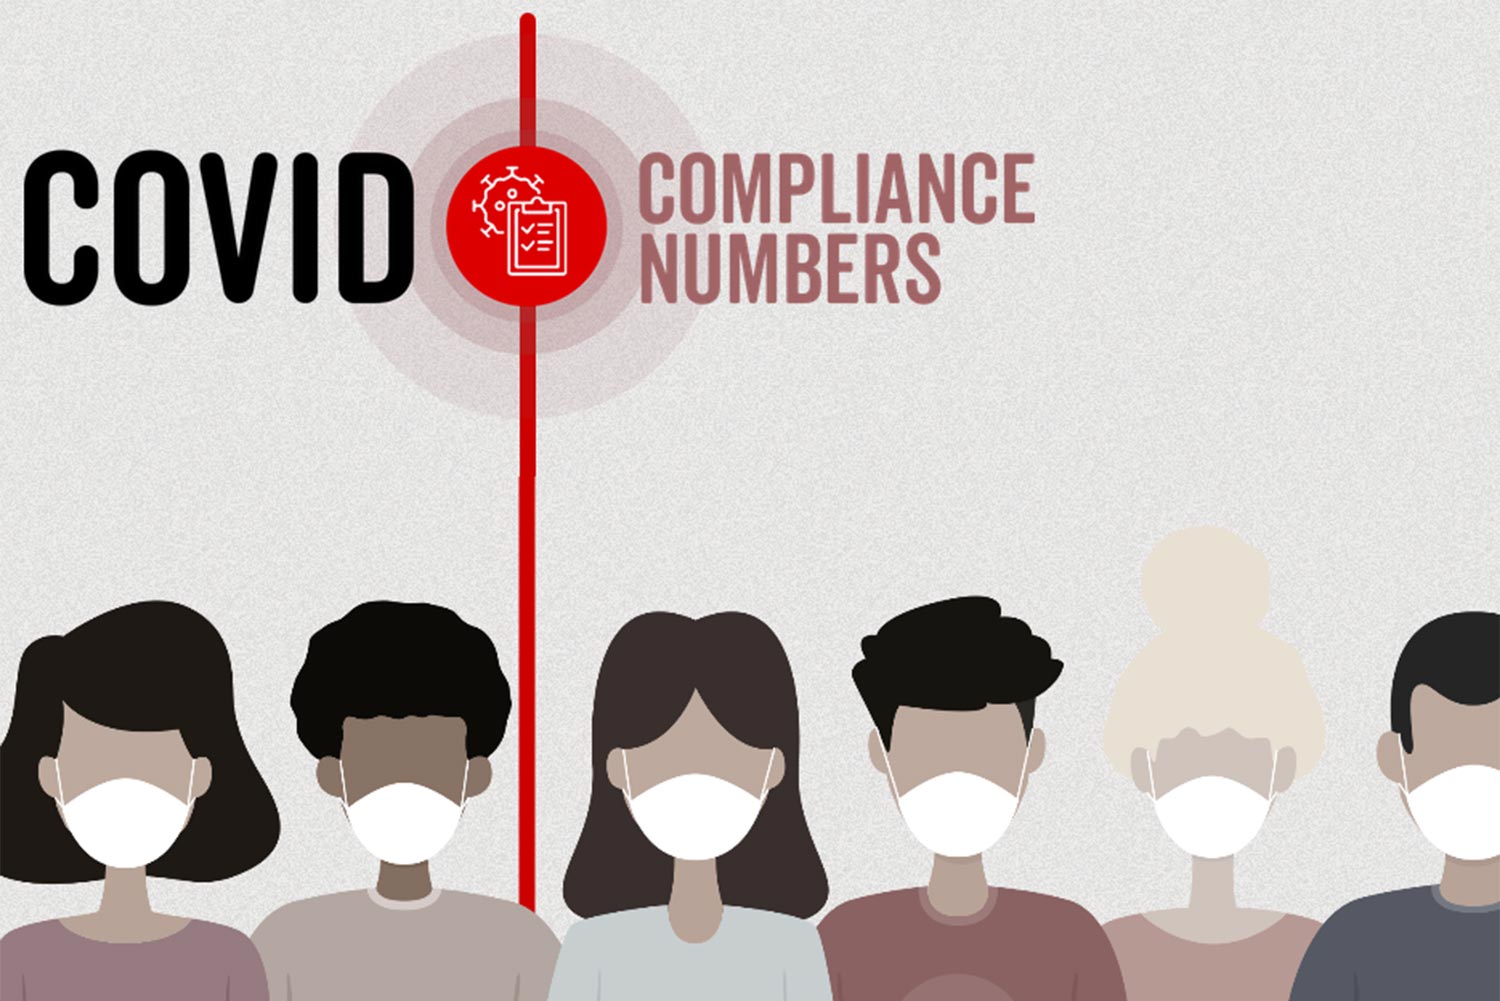 illustration of young adults wearing medical face masks. text embedded on the image says 'COVID Compliance Numbers'